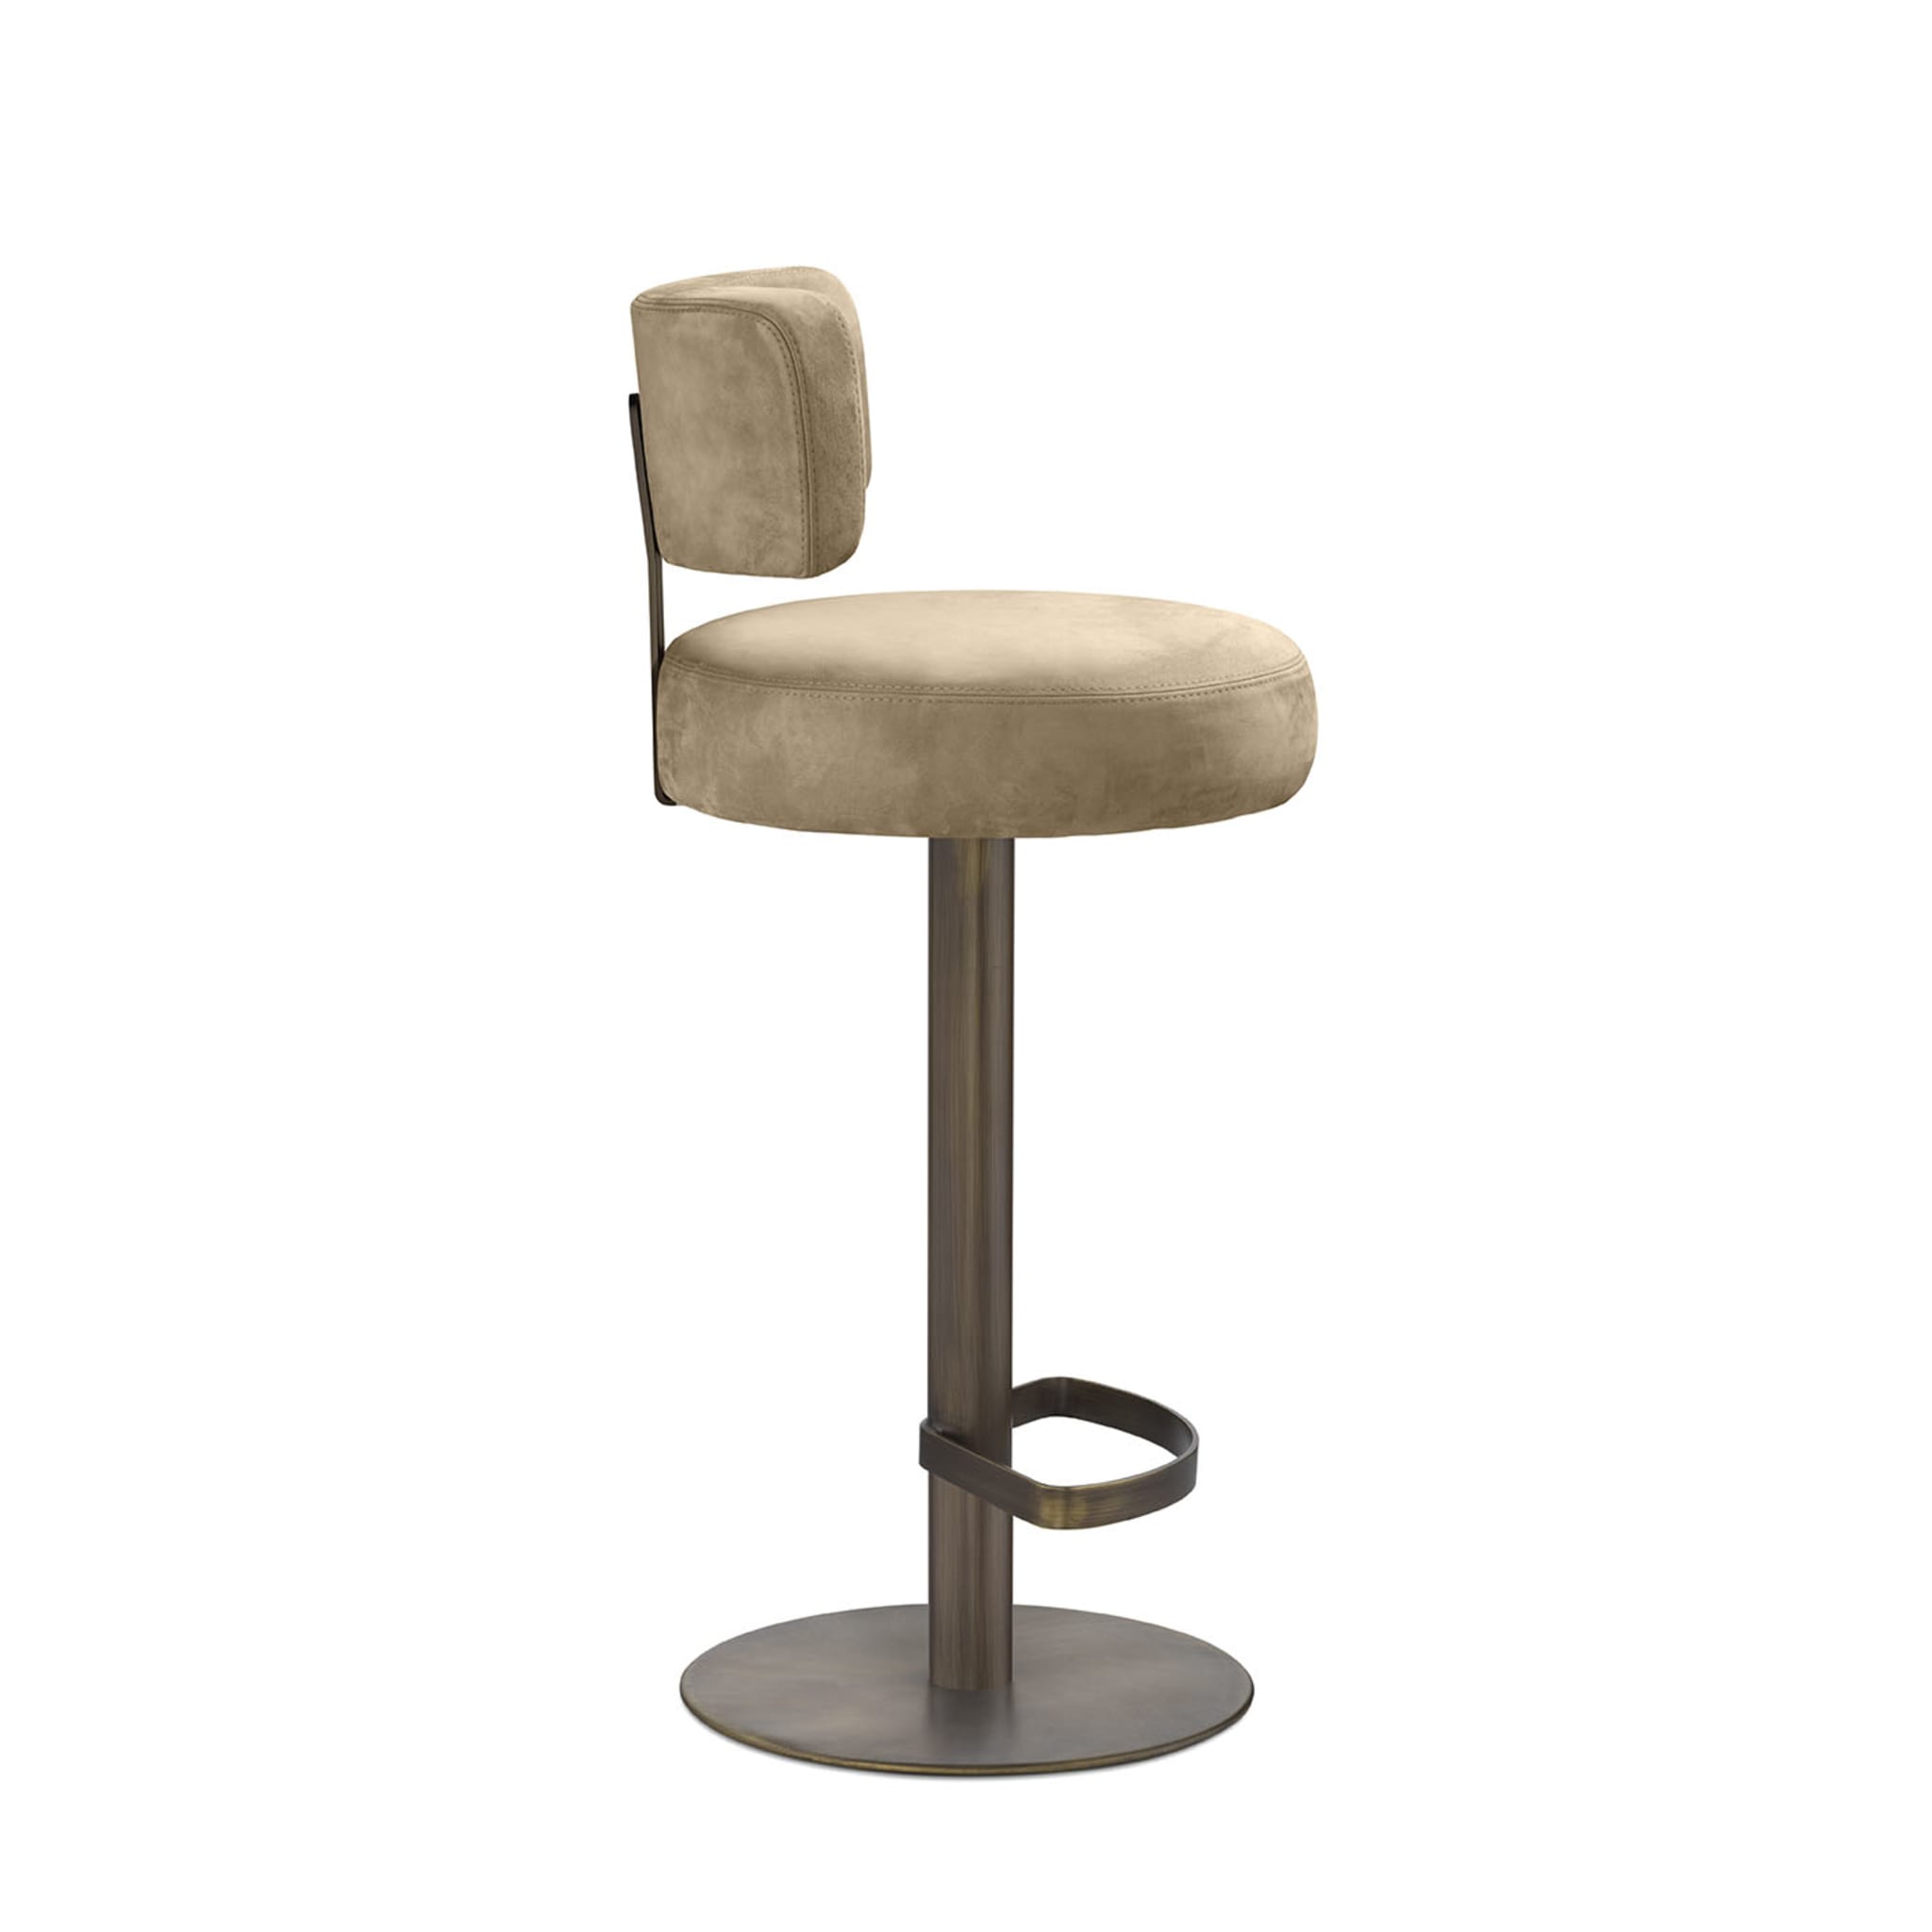 Alfred fixed Bar Stool - Alternative view 2